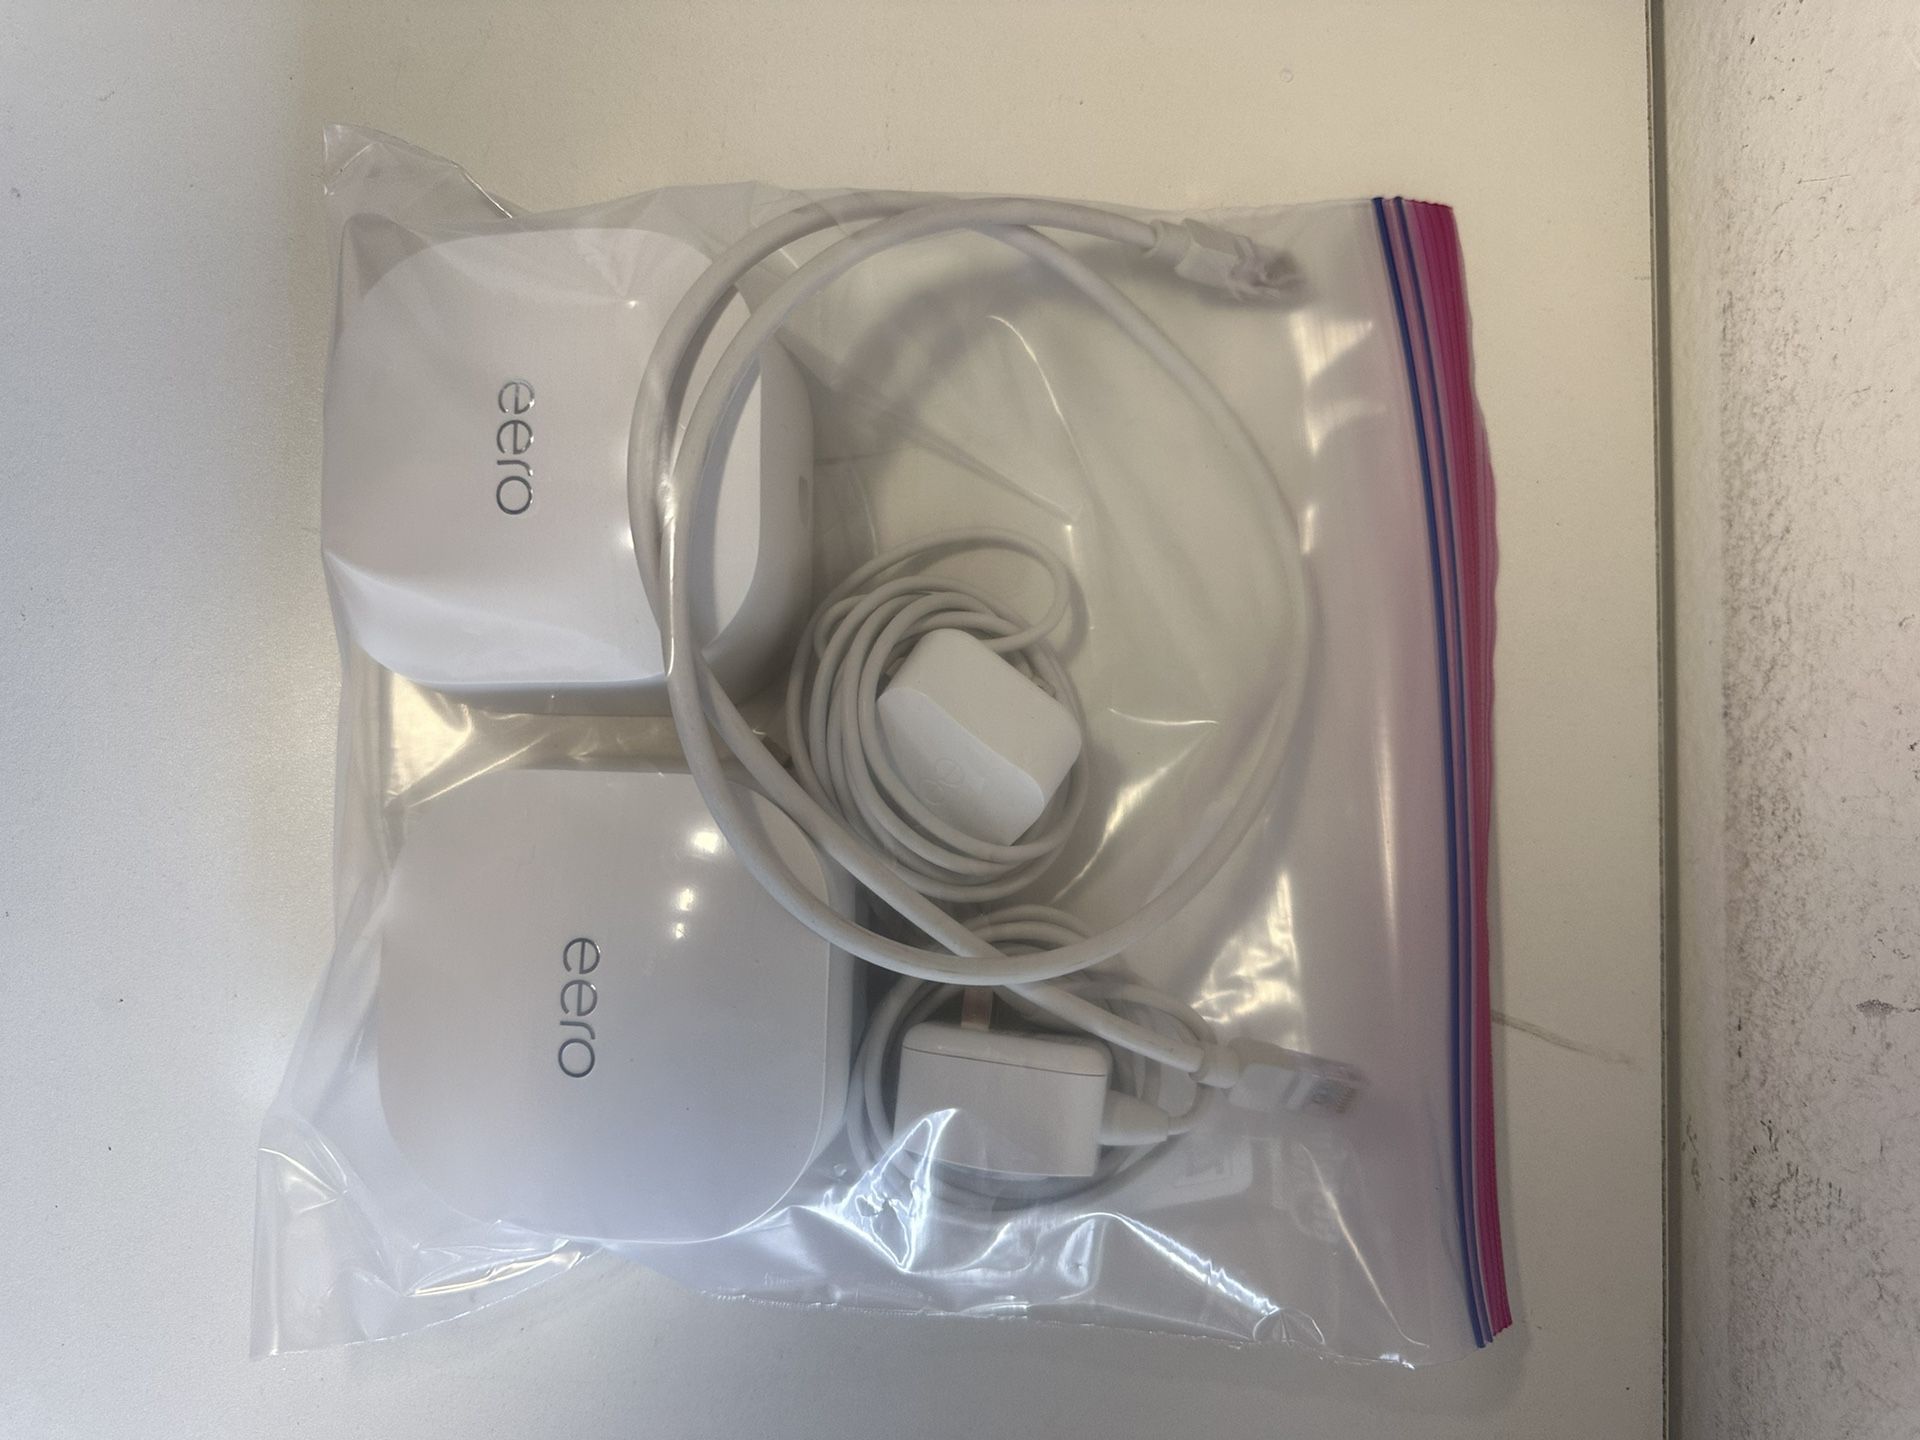 2 eero Dual-band 350 Mbps Wireless Router (J010001)